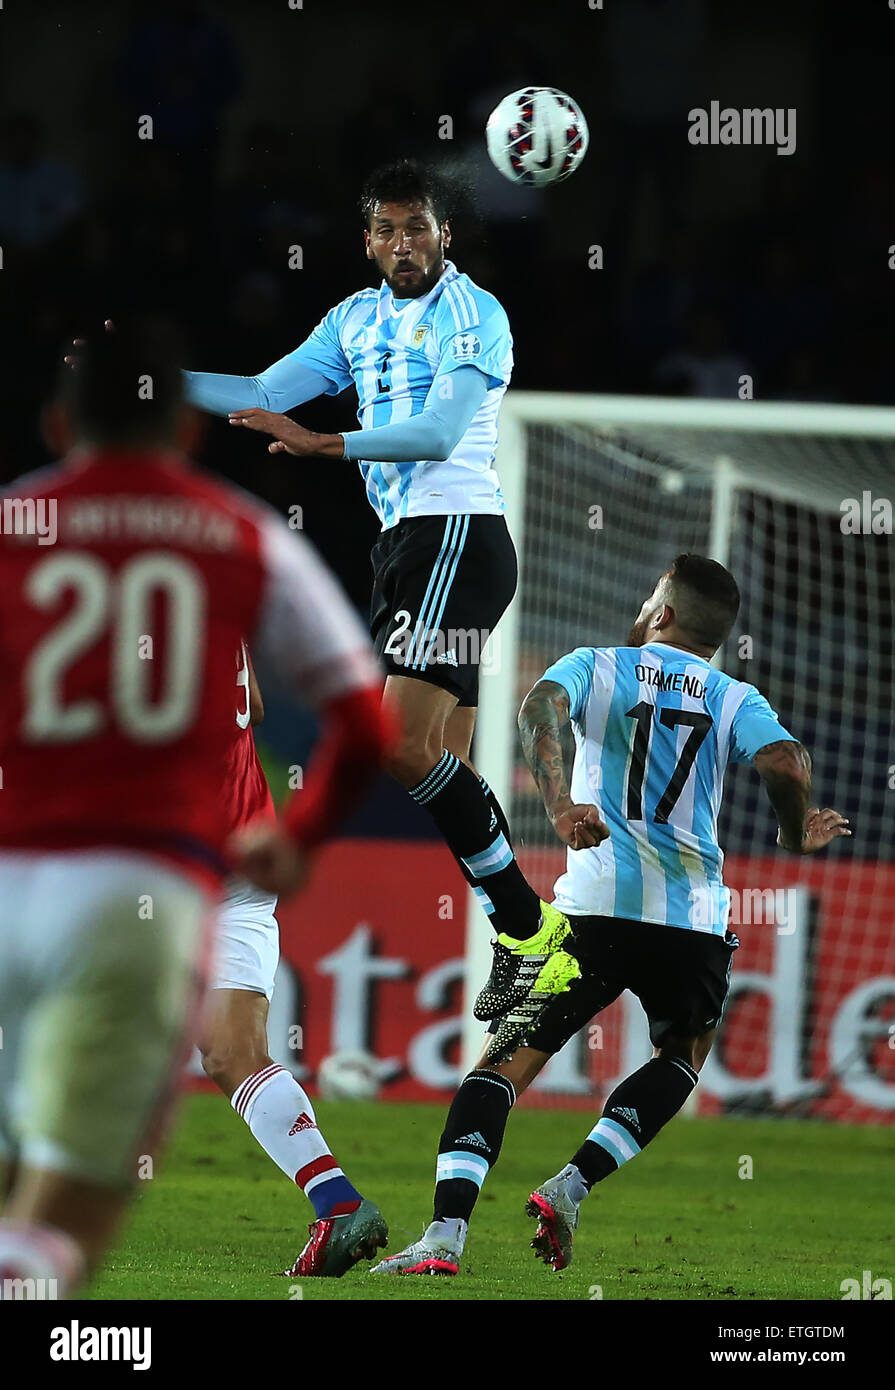 La Serena, Chile. 13th June, 2015. Argentina's Ezequiel Garay (Top) jumps for a head during their Group B match agaisnt Paraguay at Copa America 2015, in La Serena, Chile, on June 13, 2015. The match ended with a 2-2 draw. Credit:  Xu Zijian/Xinhua/Alamy Live News Stock Photo